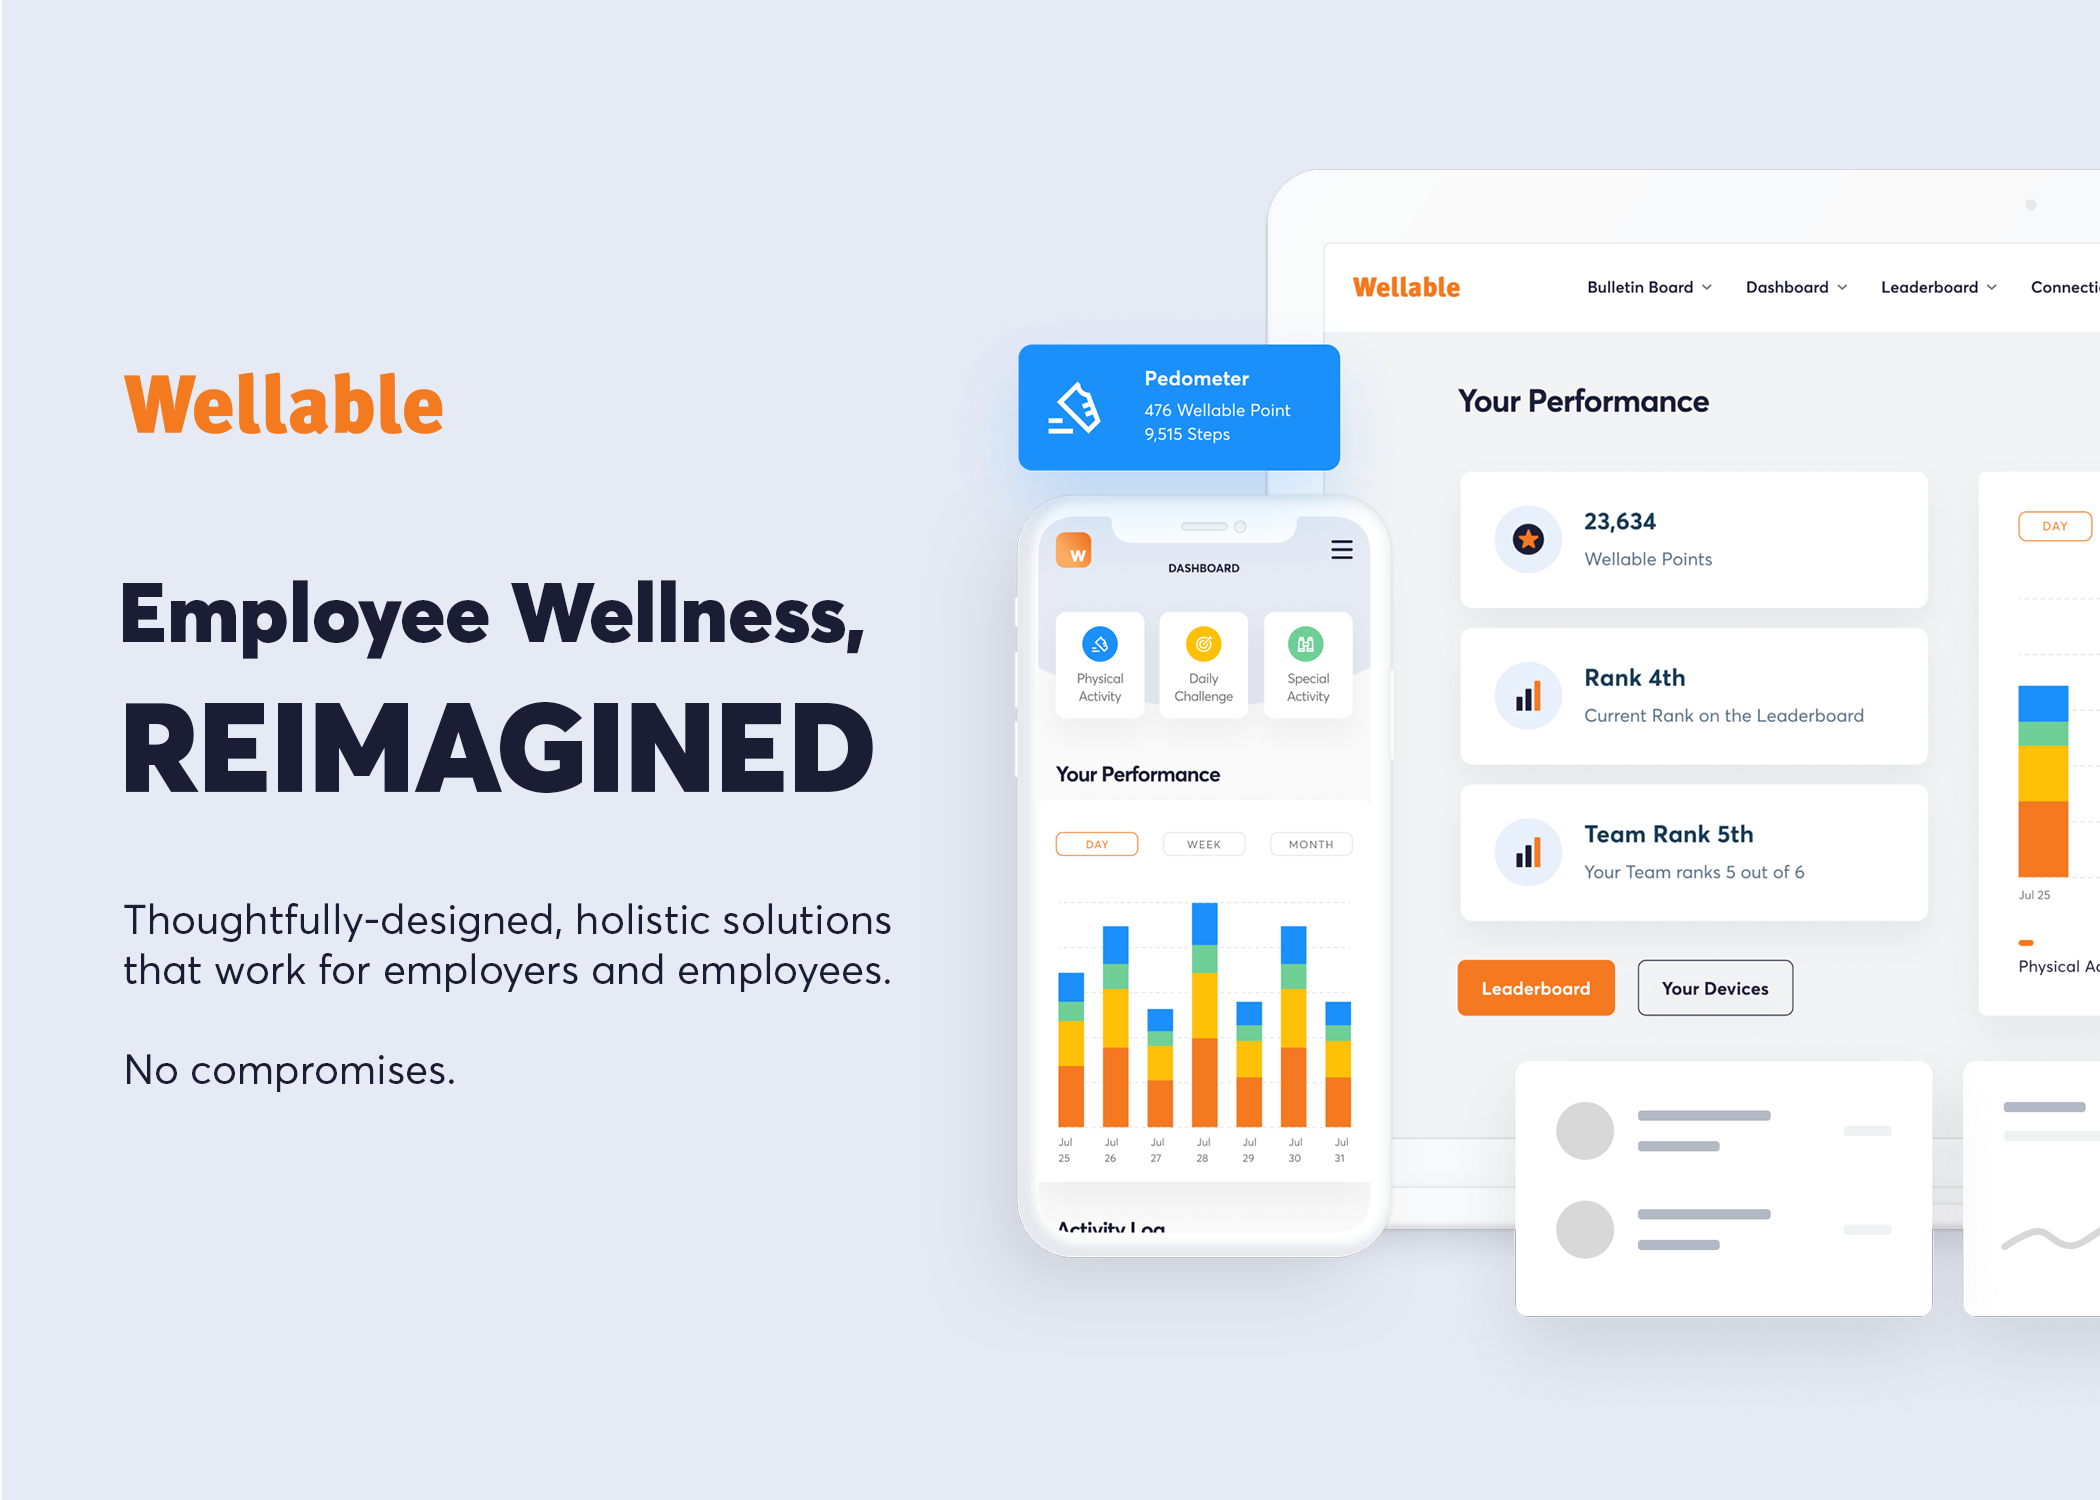 Wellable Brings Health and Wellness Options to CRE Marketplace | HqO